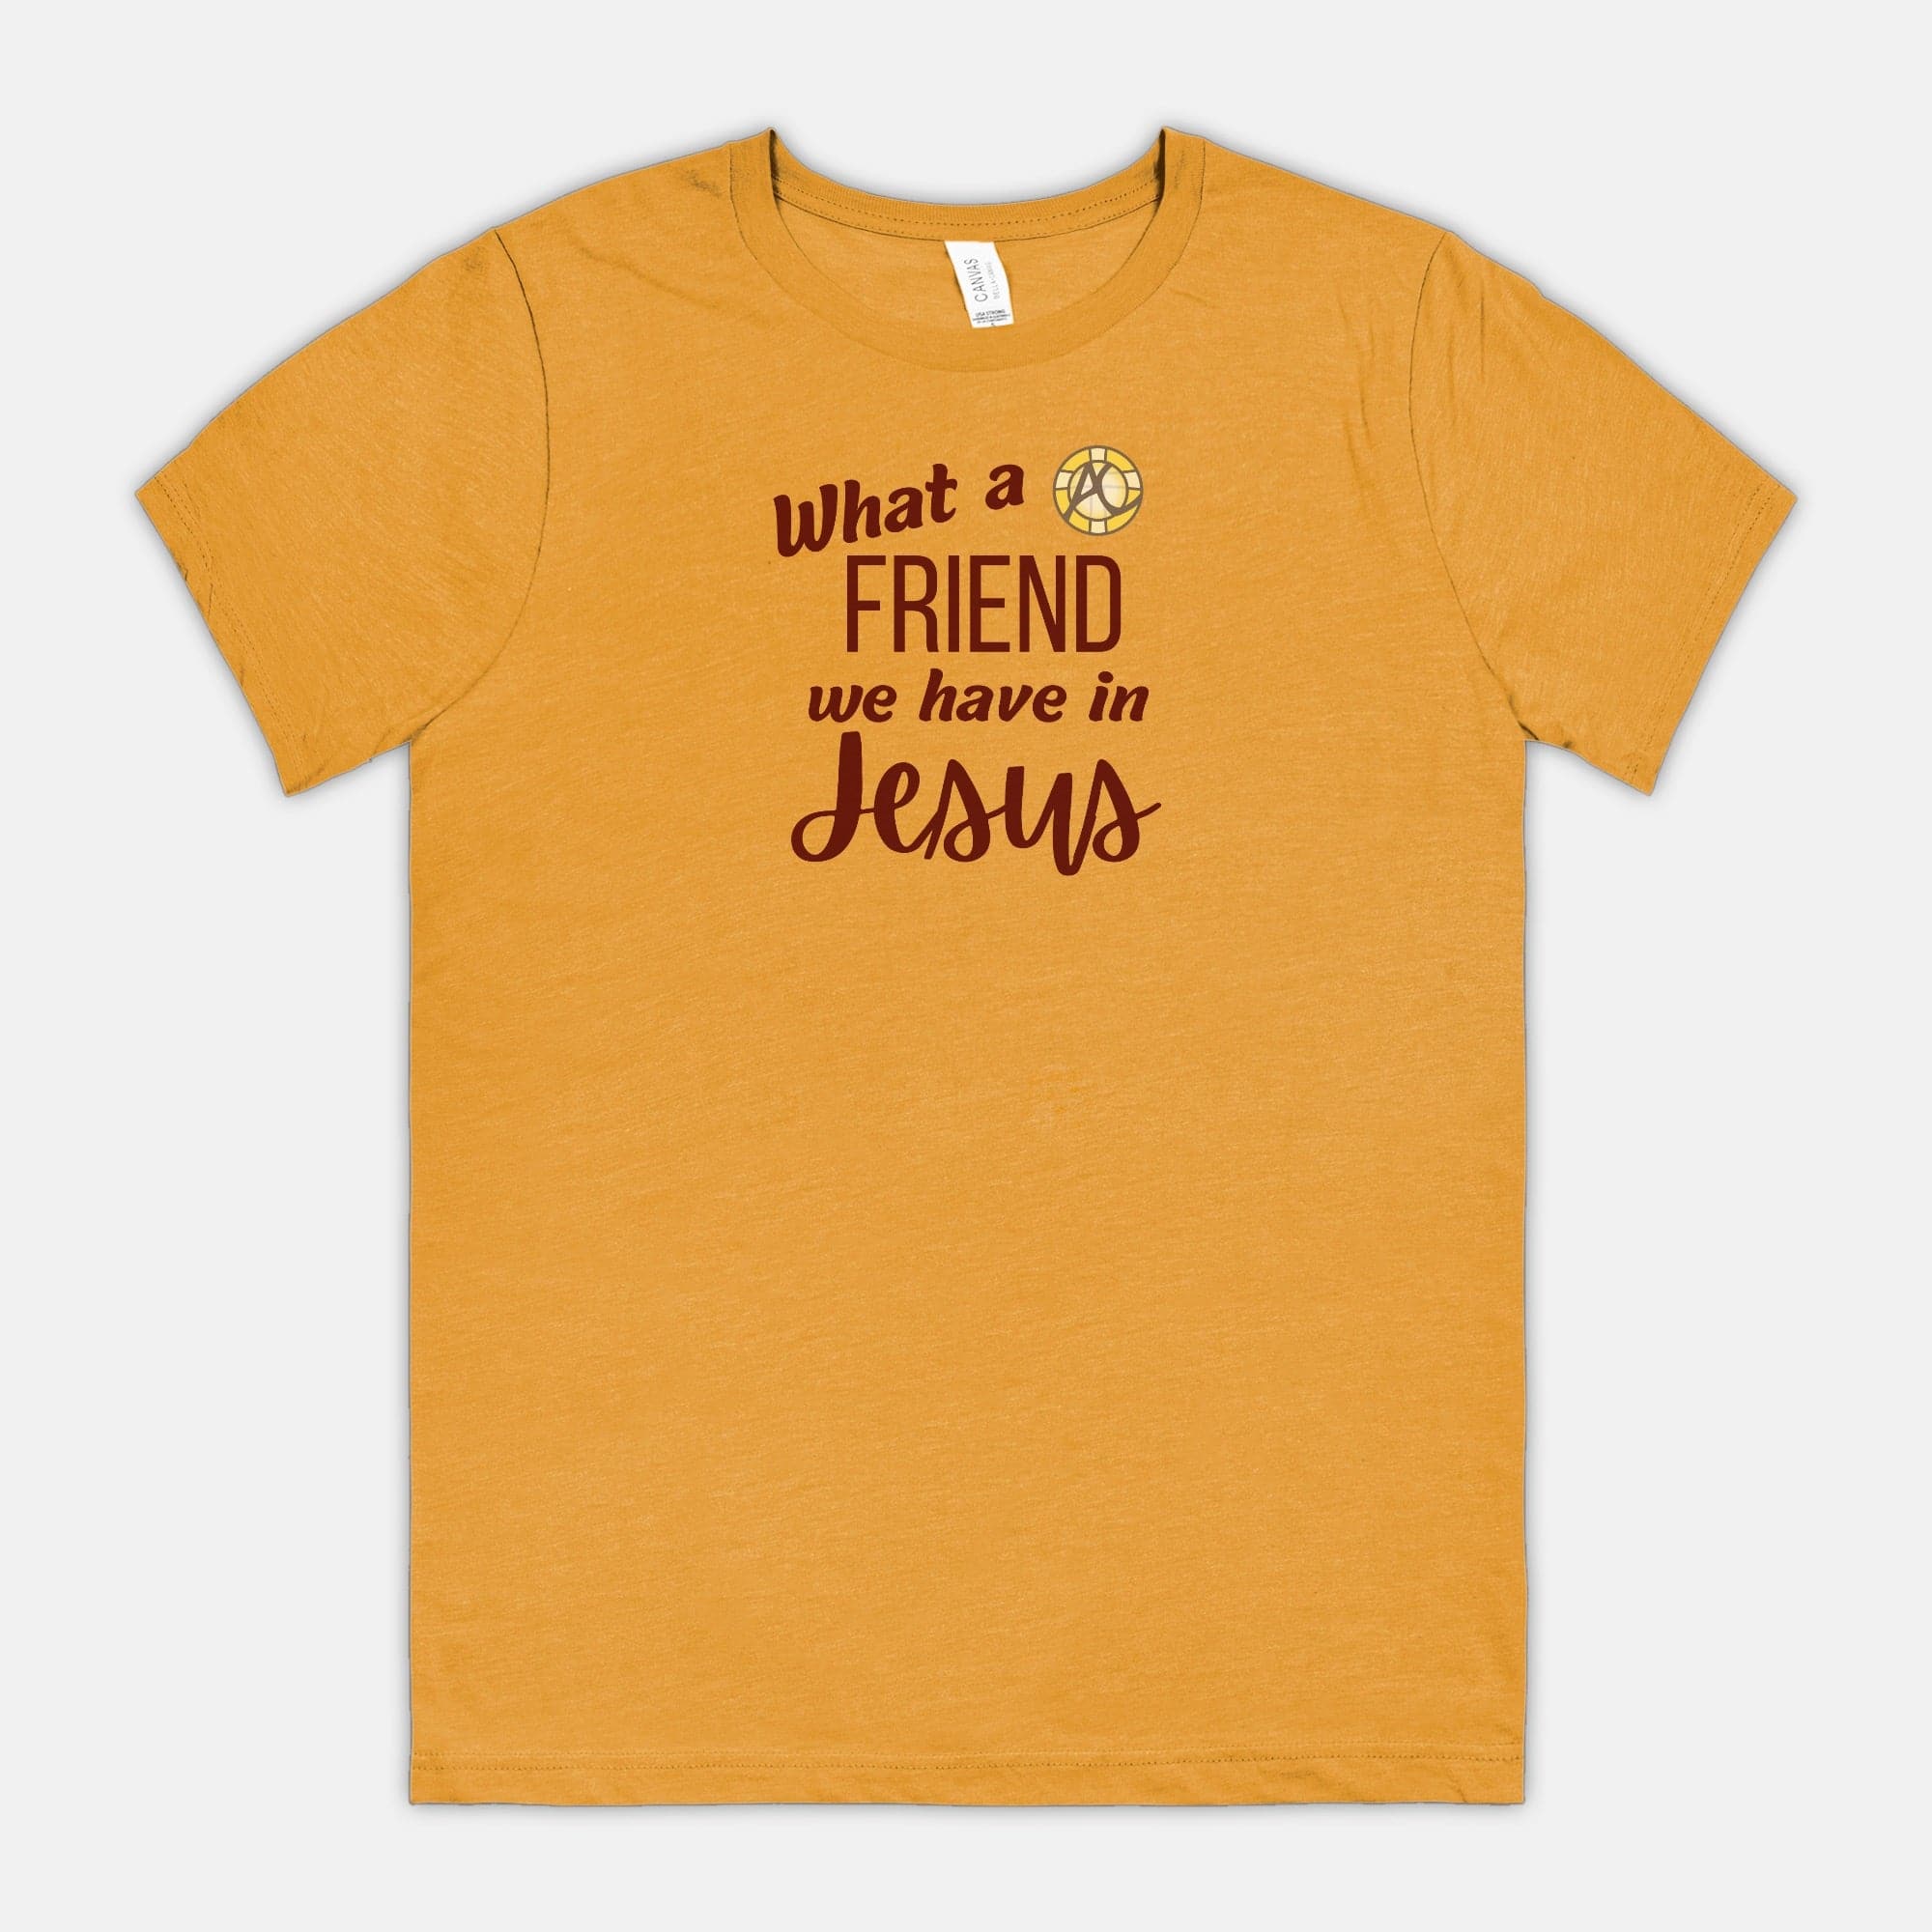 Ad Crucem T-shirt - What a Friend we have in Jesus